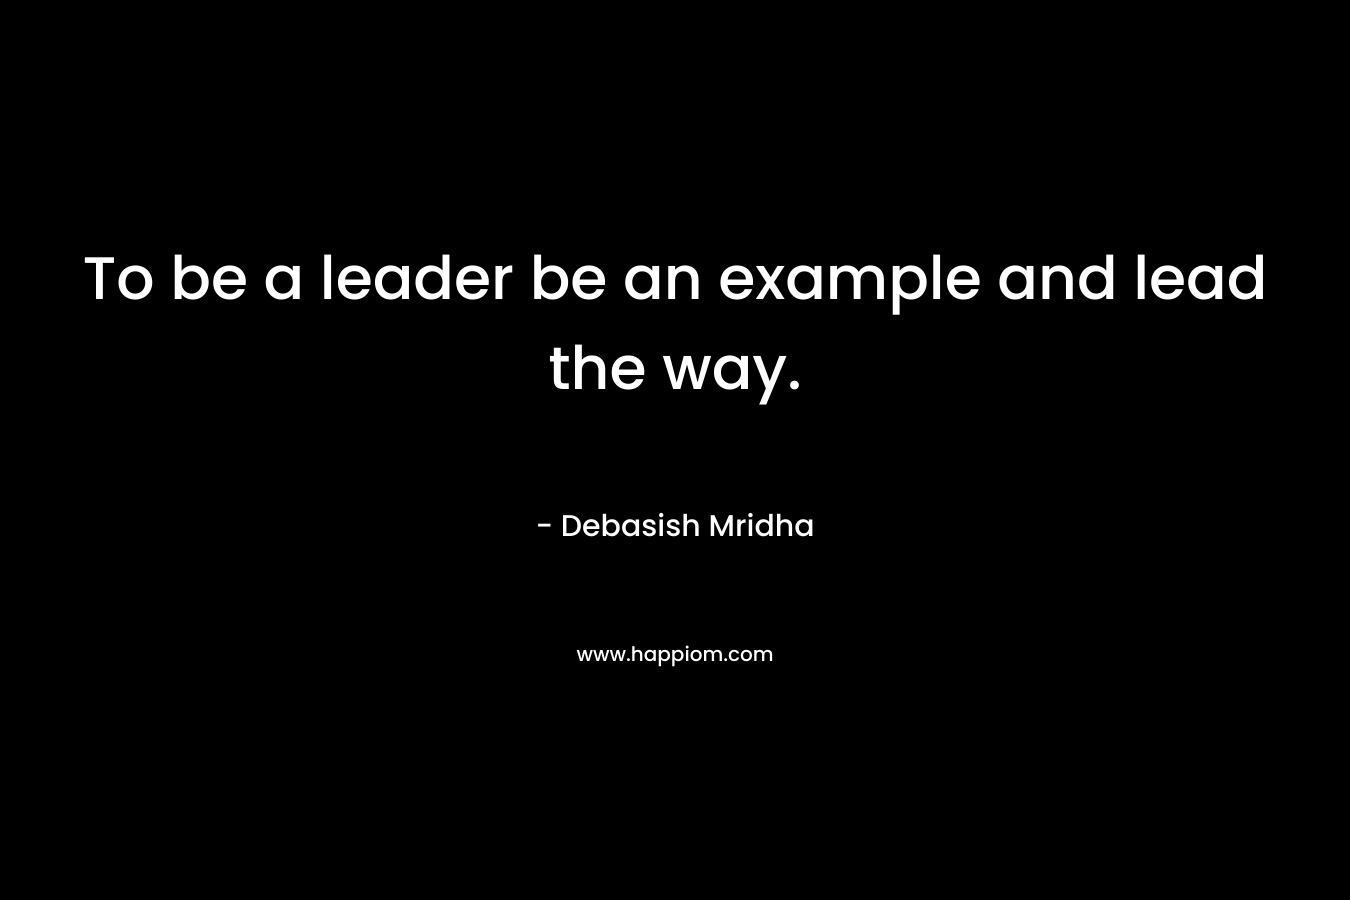 To be a leader be an example and lead the way. – Debasish Mridha